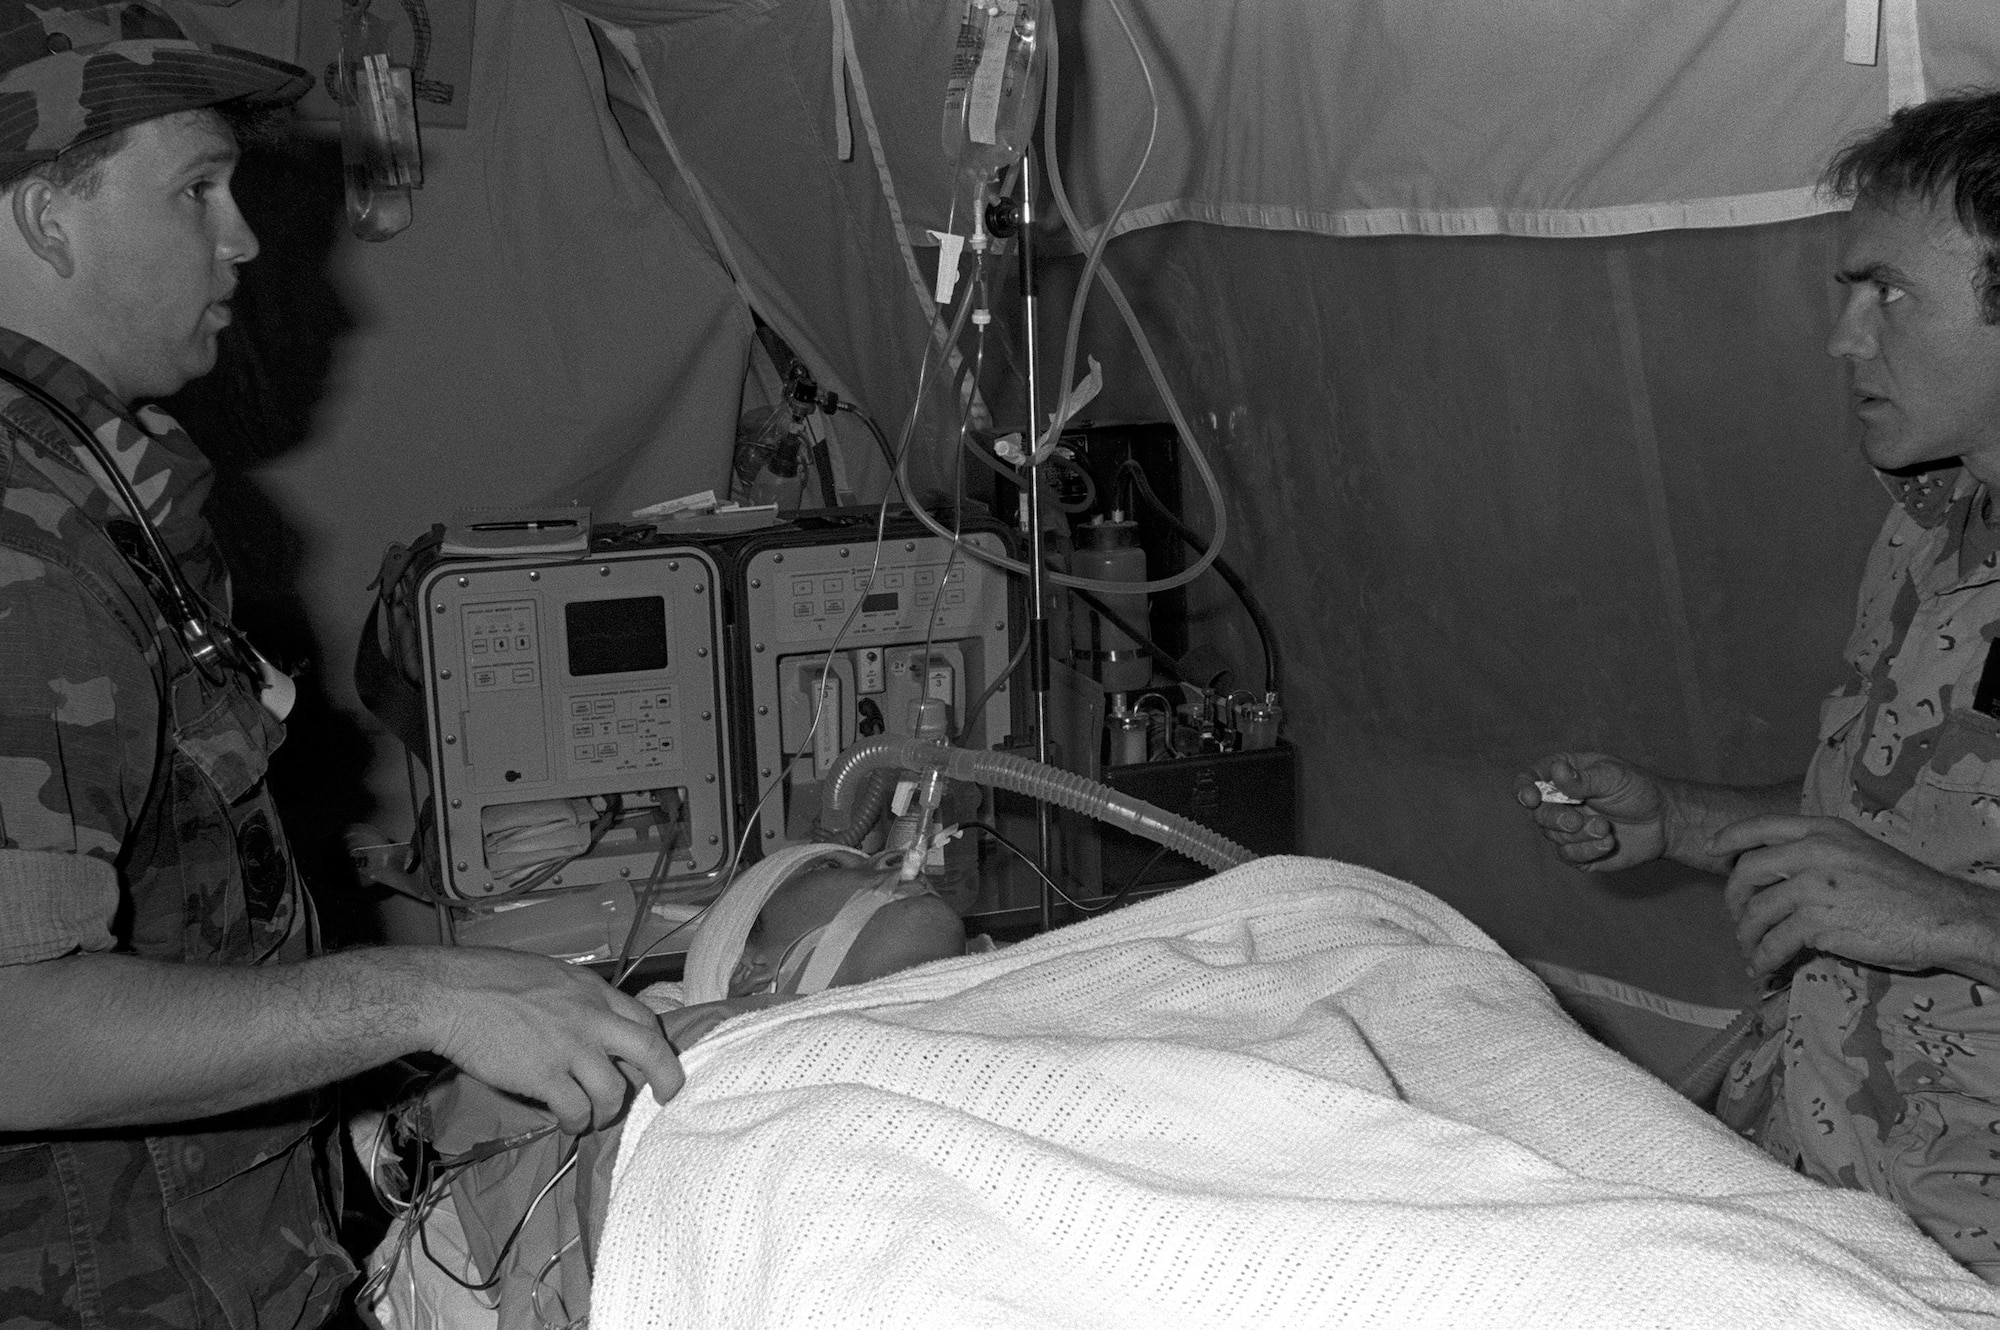 Medical personnel prepare Corporal Richard Ramirez, a member of the 1st Marine Division, for medical evacuation by a C-141B Starlifter aircraft from Al-Jubail Airport to Germany for treatment of chest wounds sustained during Operation Desert Storm. During this time, Aeromedical Evacuation teams were prepared and were able to transport up to 3,600 casualties a day.